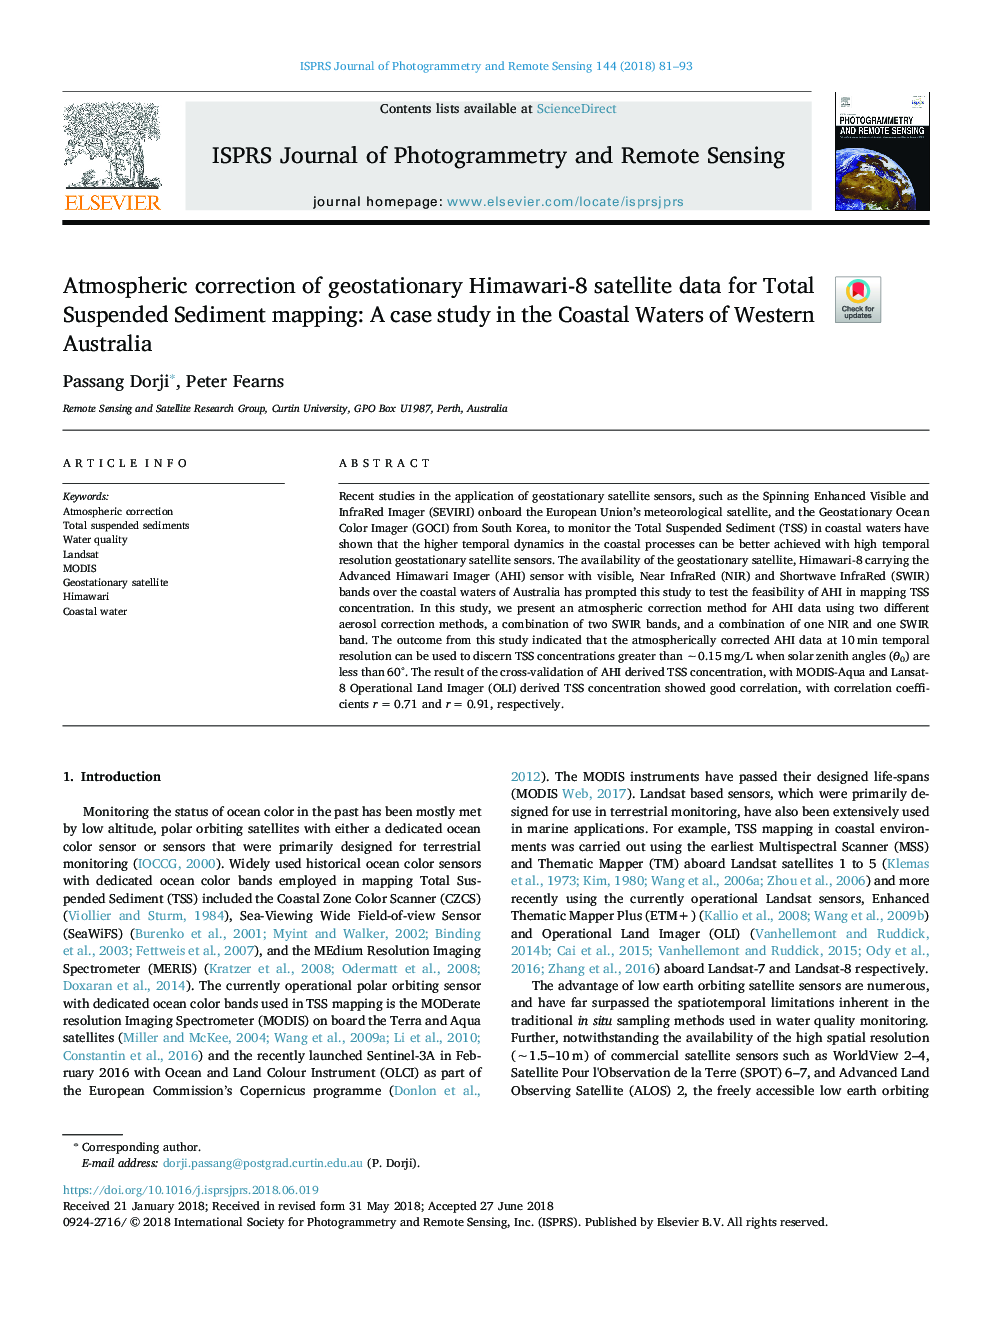 Atmospheric correction of geostationary Himawari-8 satellite data for Total Suspended Sediment mapping: A case study in the Coastal Waters of Western Australia